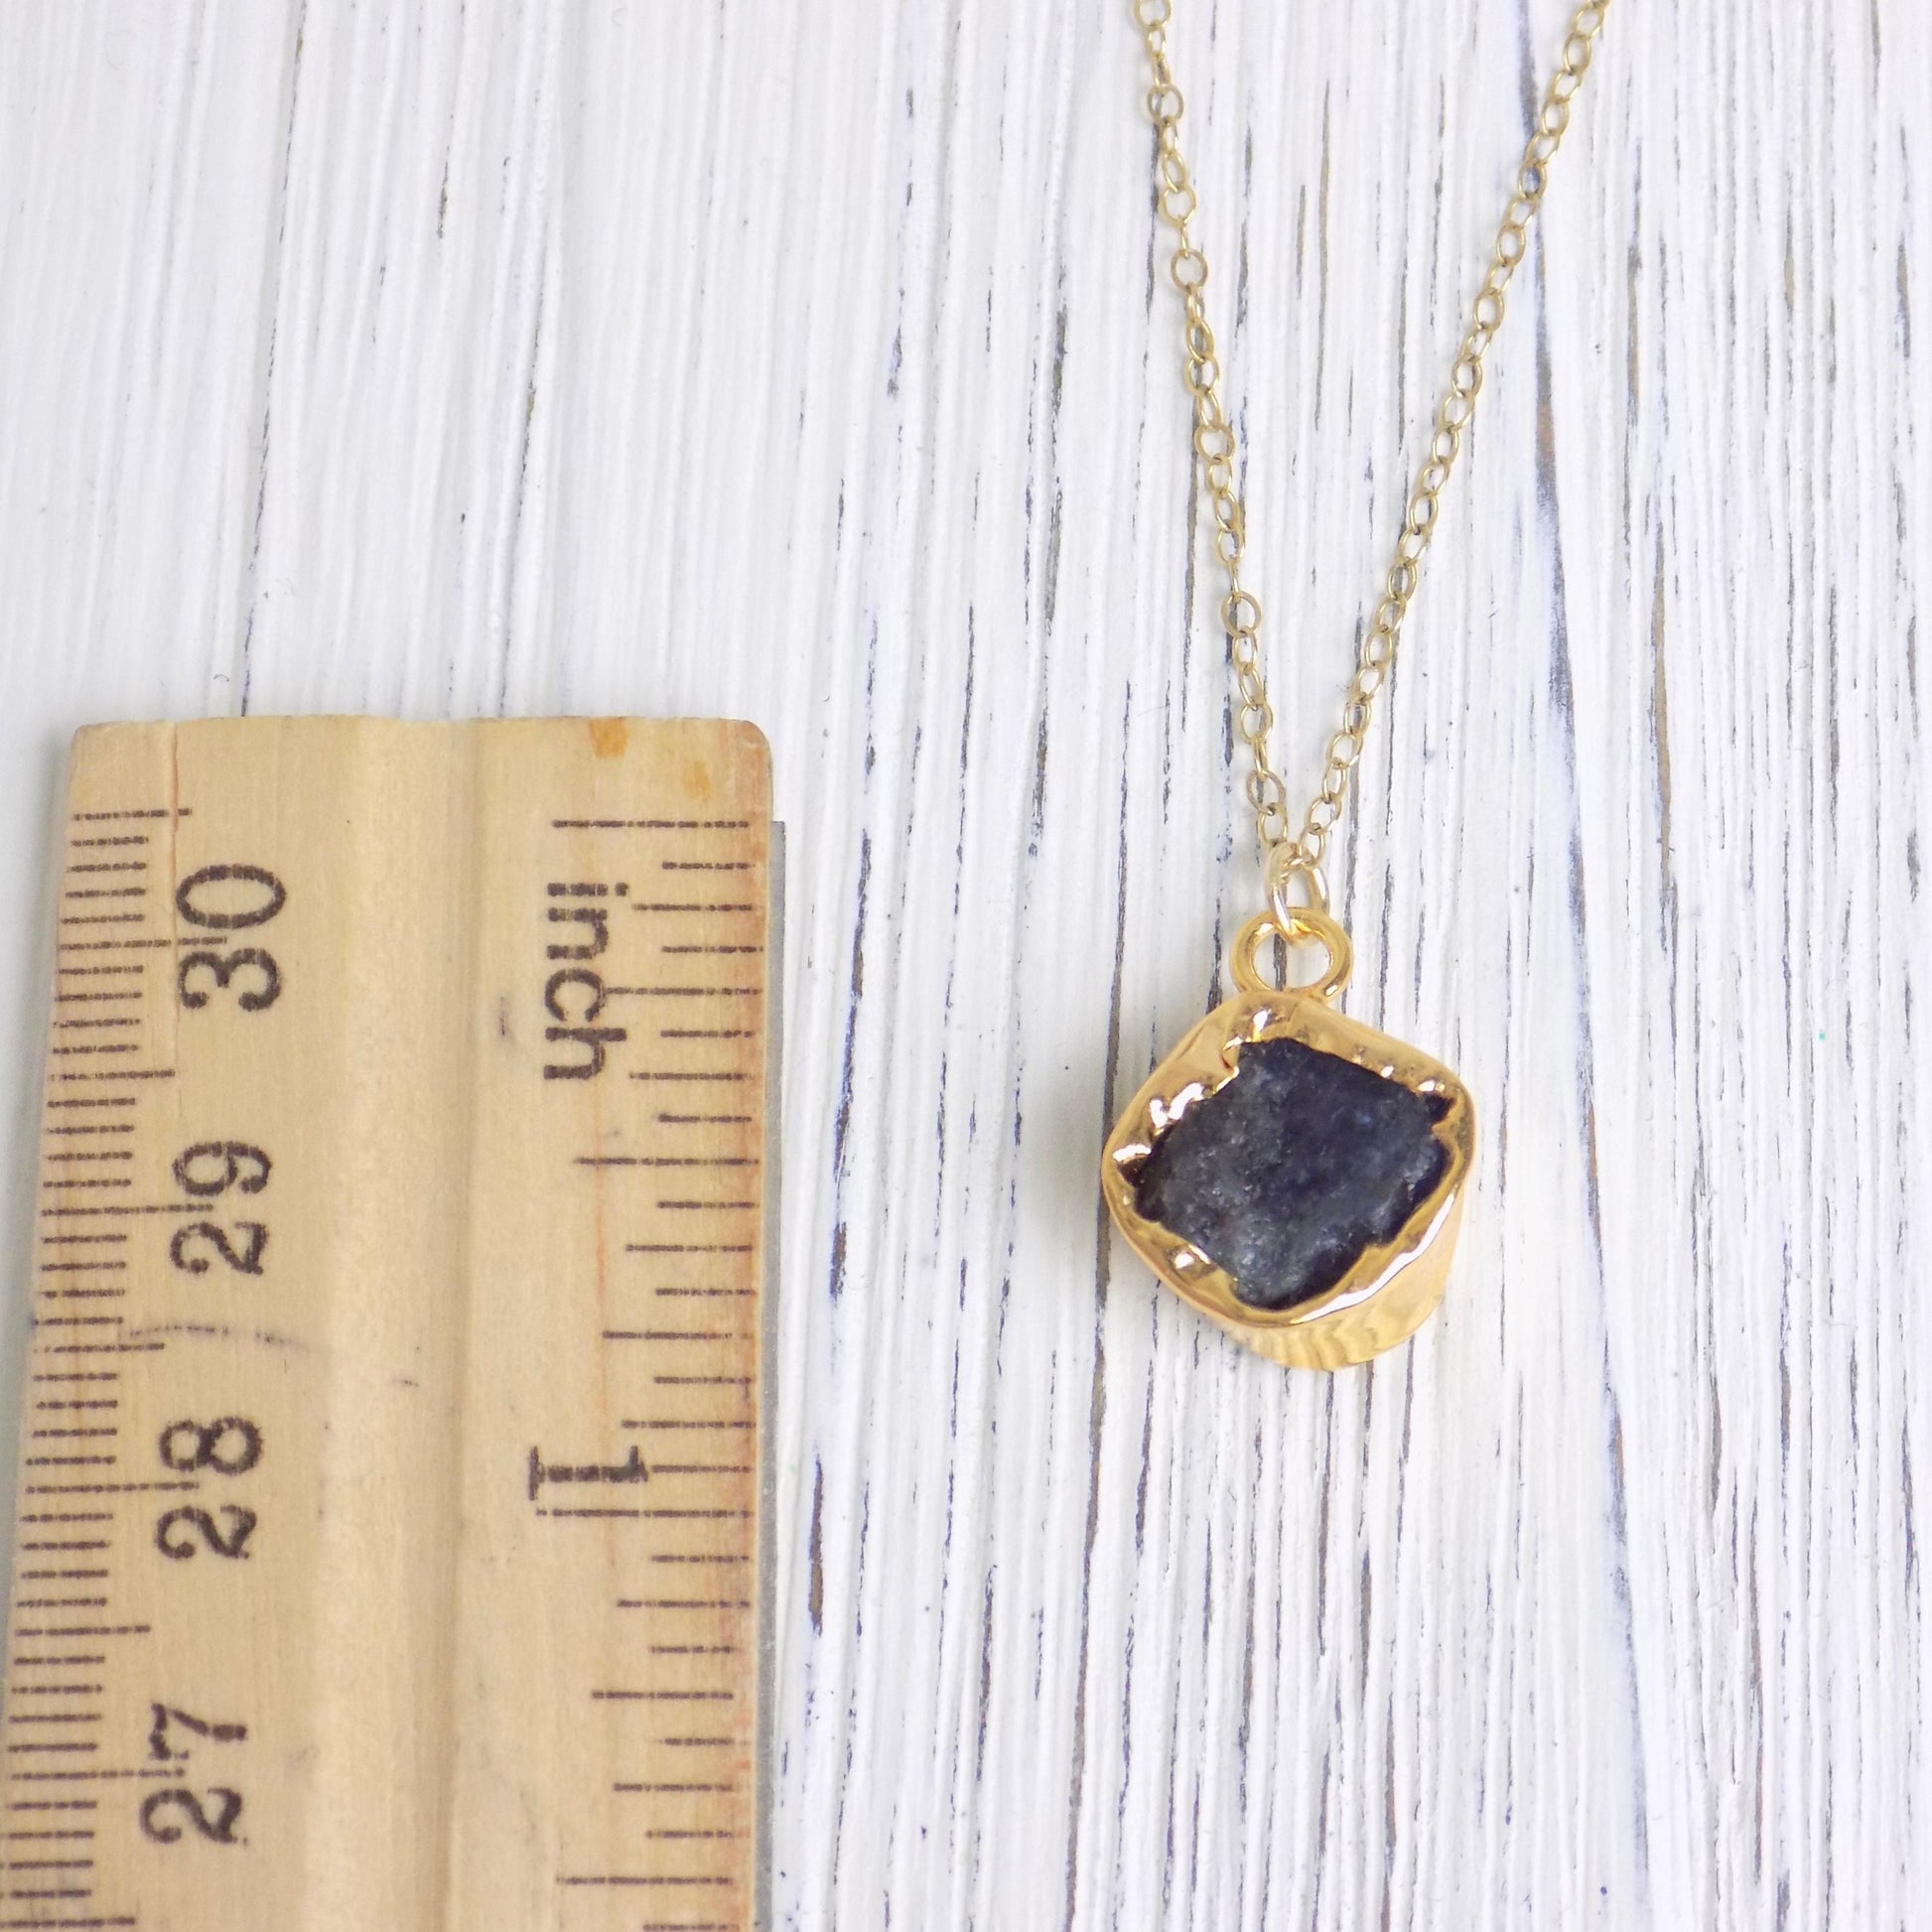 Raw Tanzanite Necklace Gold, Dark Blue Crystal Pendant, Christmas Gift For Her, G14-179